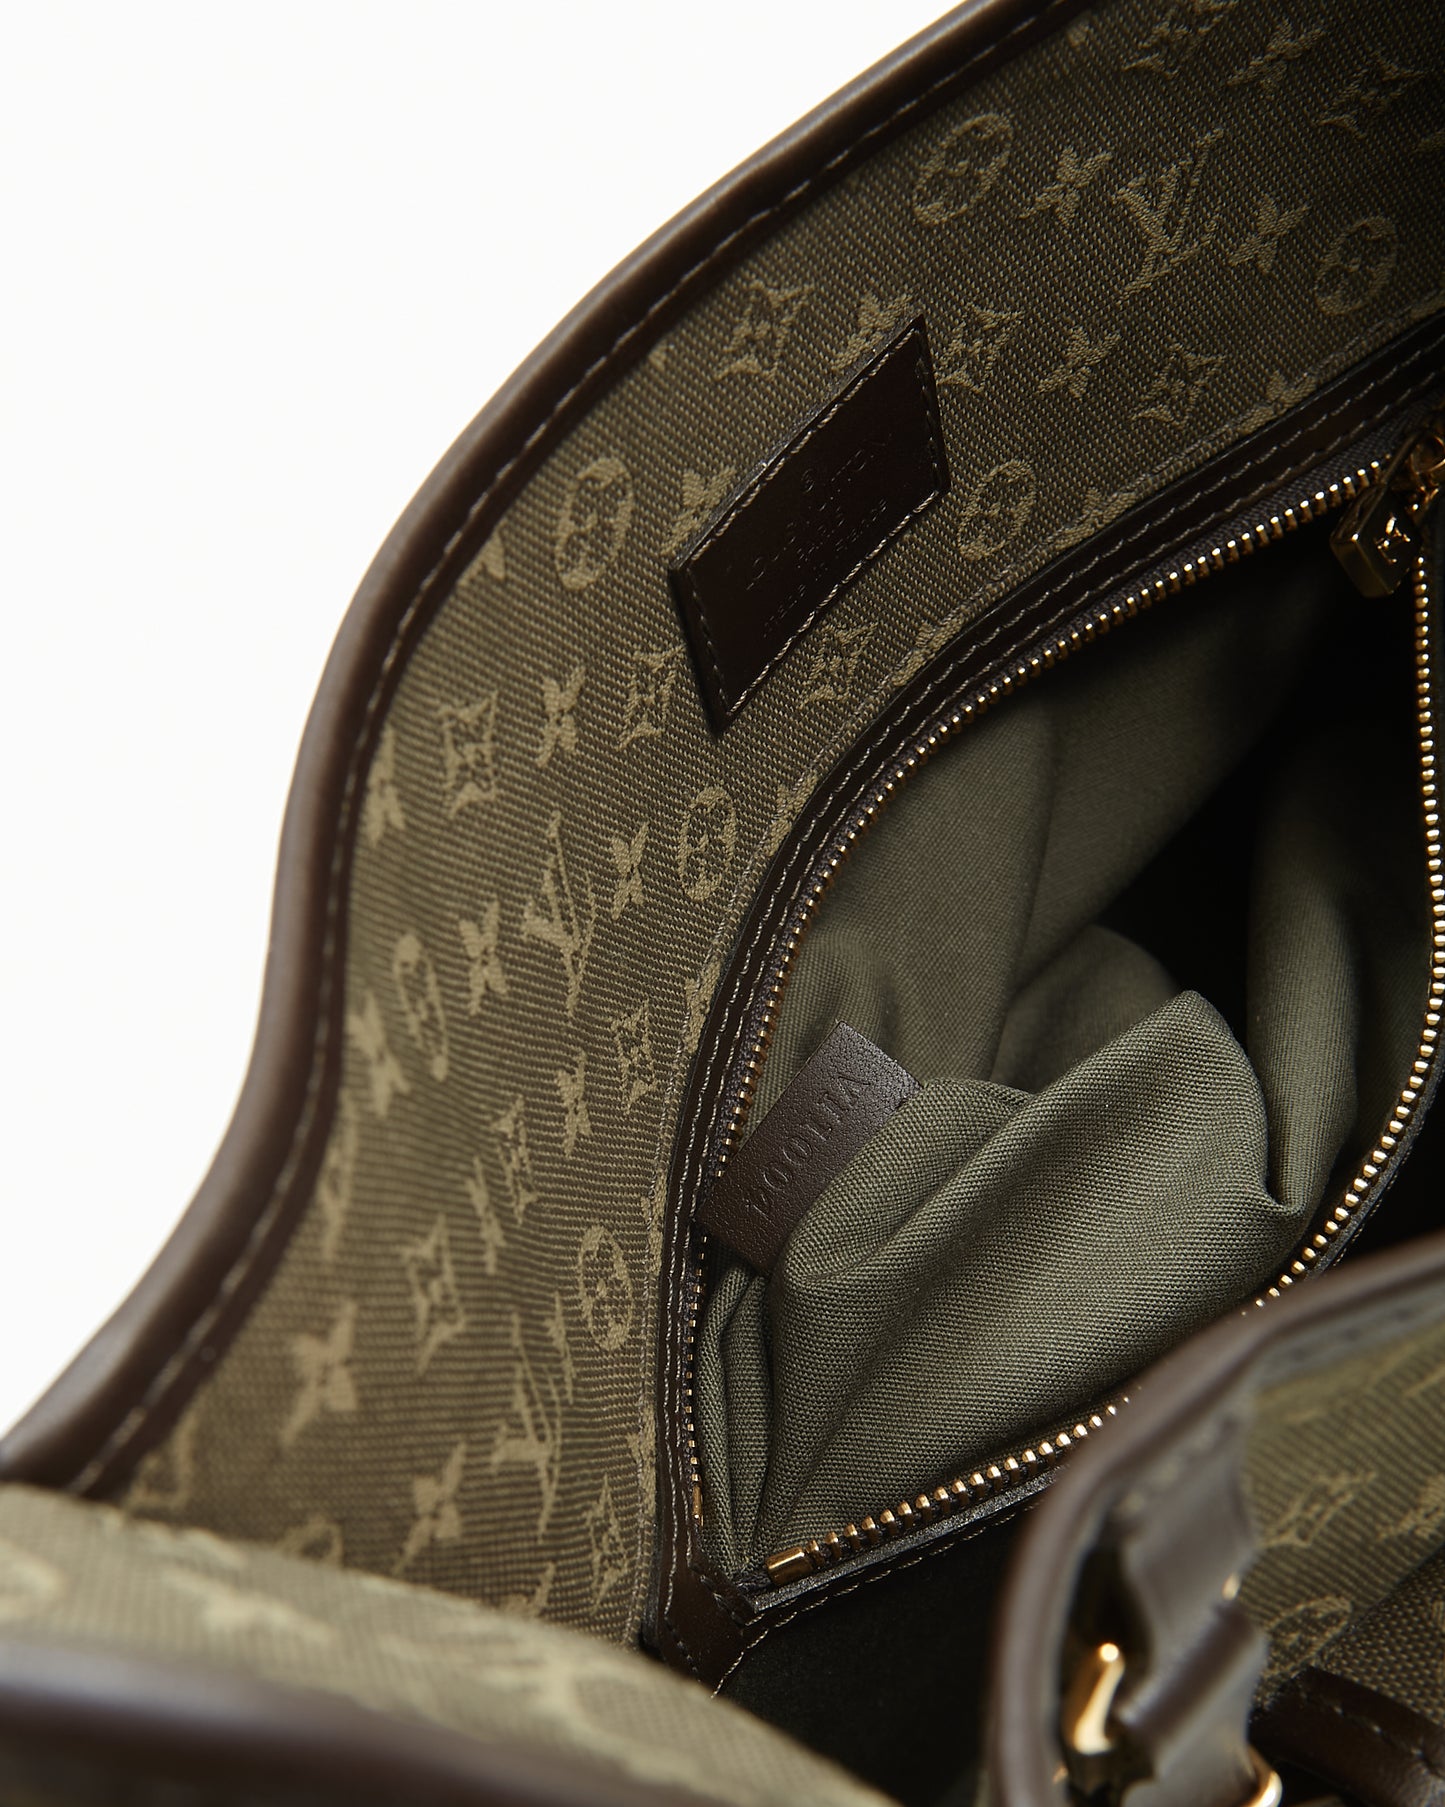 Louis Vuitton Sac messager Mary Kate Besace en toile monogramme Mini Lin vert olive